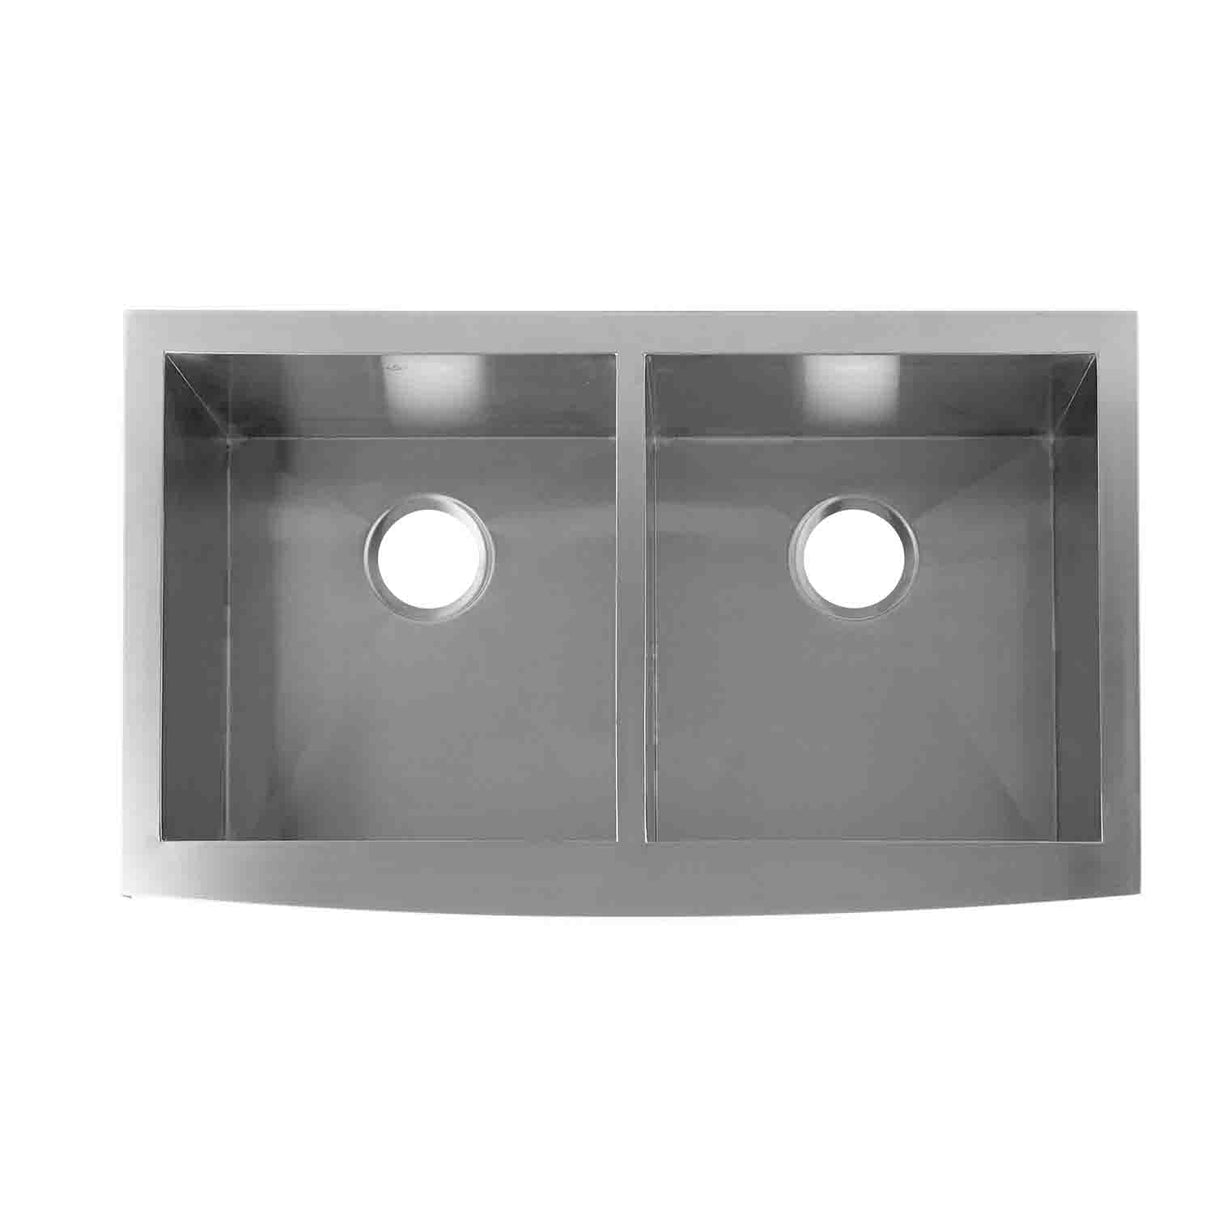 DAX Stainless Steel 50/ 50 Farmhouse Double Bowl Top Mount Kitchen Sink, Brushed Stainless Steel DAX-SQ-3320F